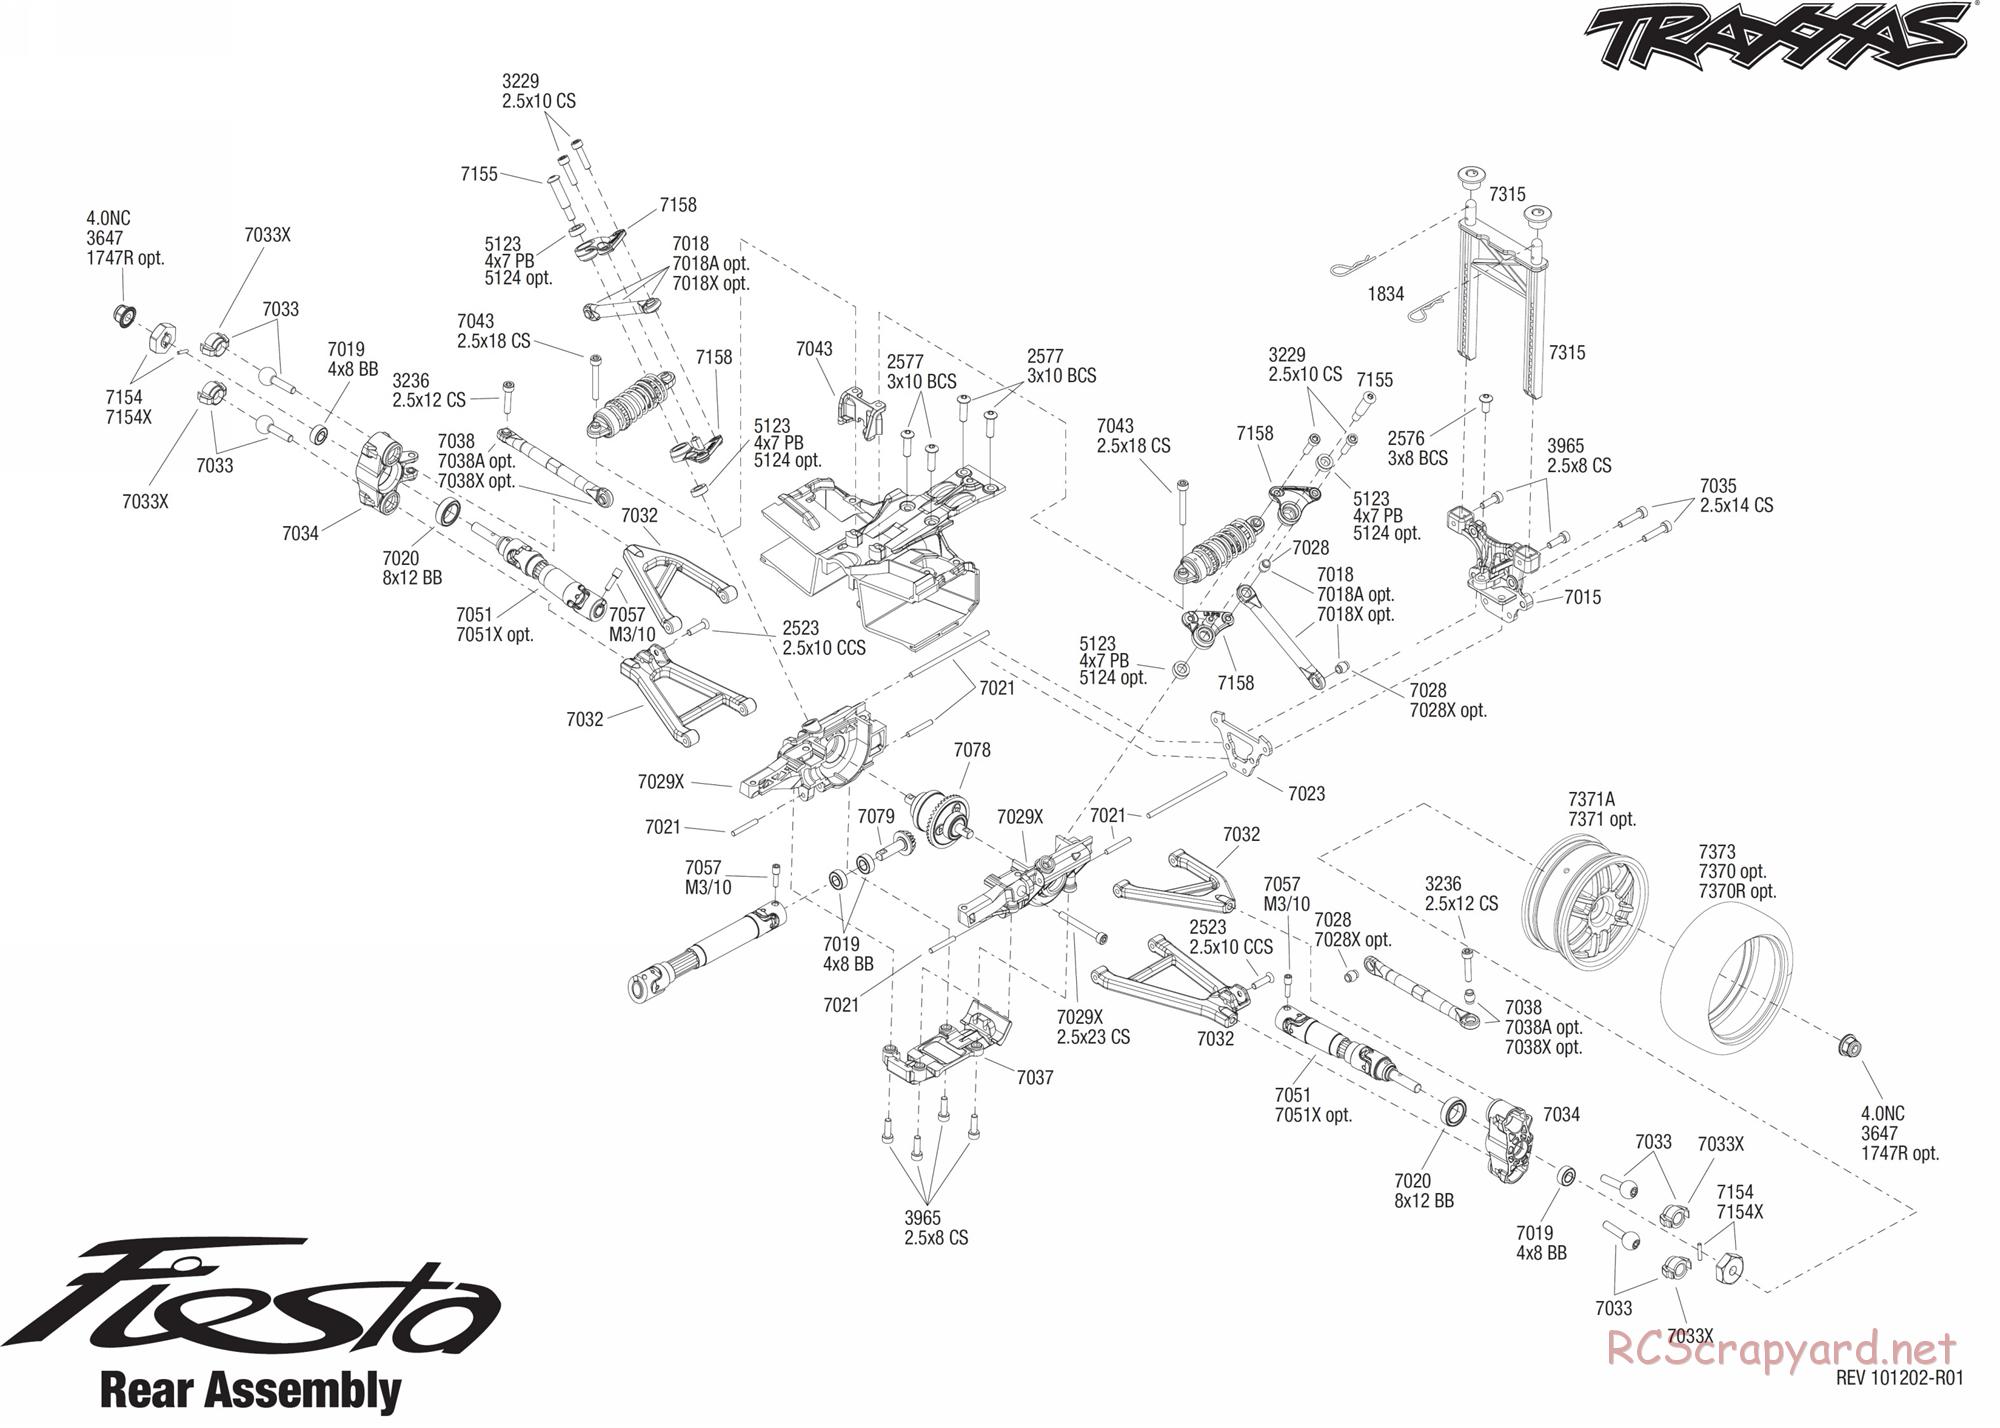 Traxxas - 1/16 Ford Fiesta (2011) - Exploded Views - Page 5